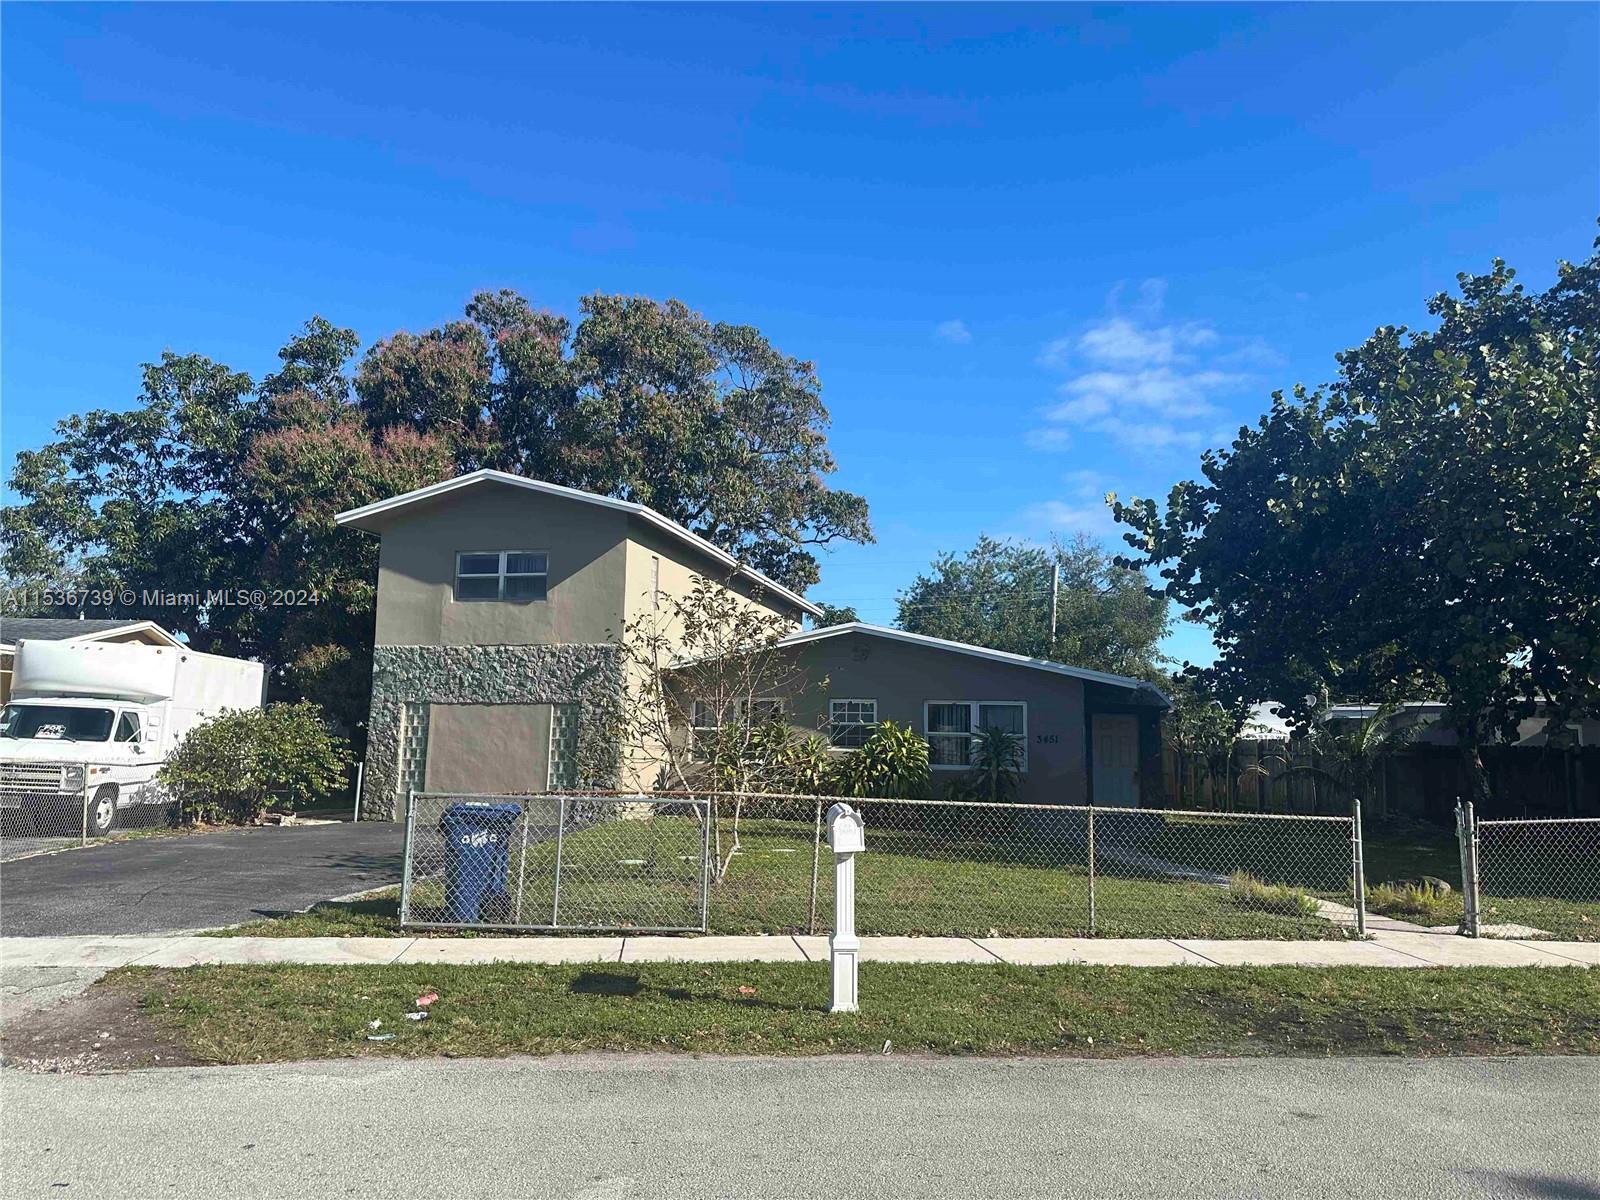 Photo of 3451 NW 1st St in Lauderhill, FL